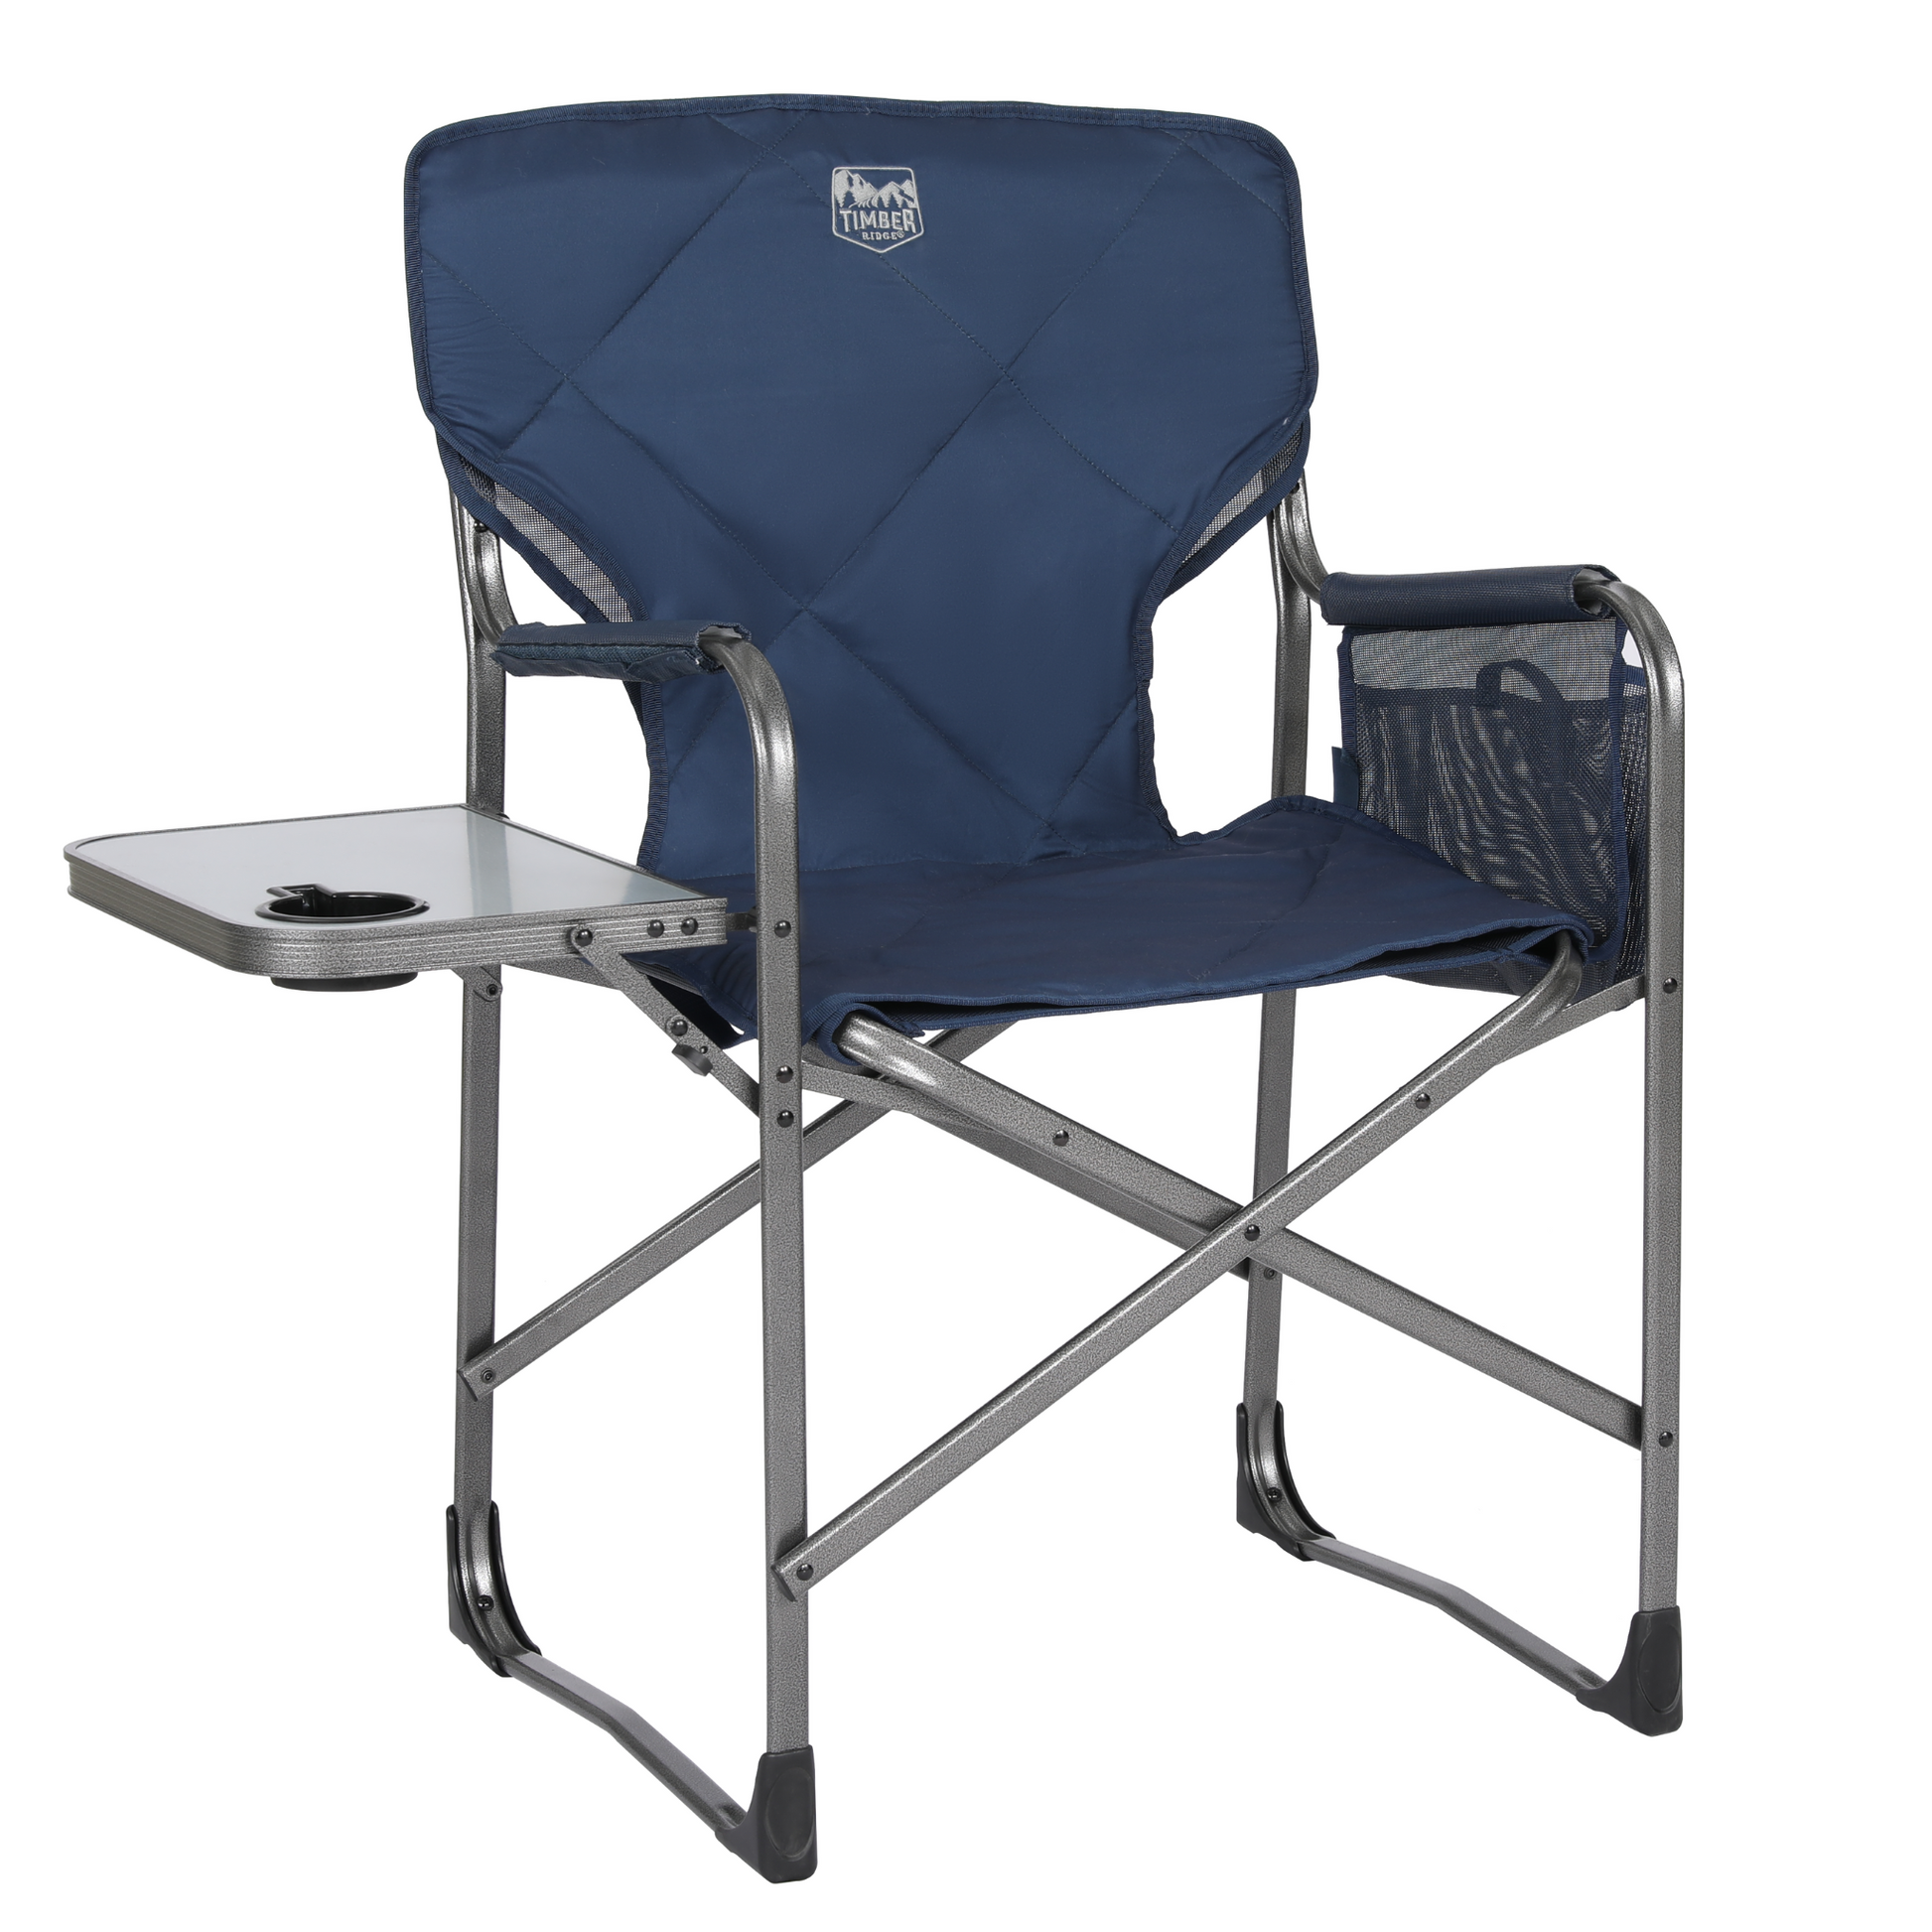 BOZTIY 2-Piece Heated Camping Chair, Heats Back and Seat, 3 Heat